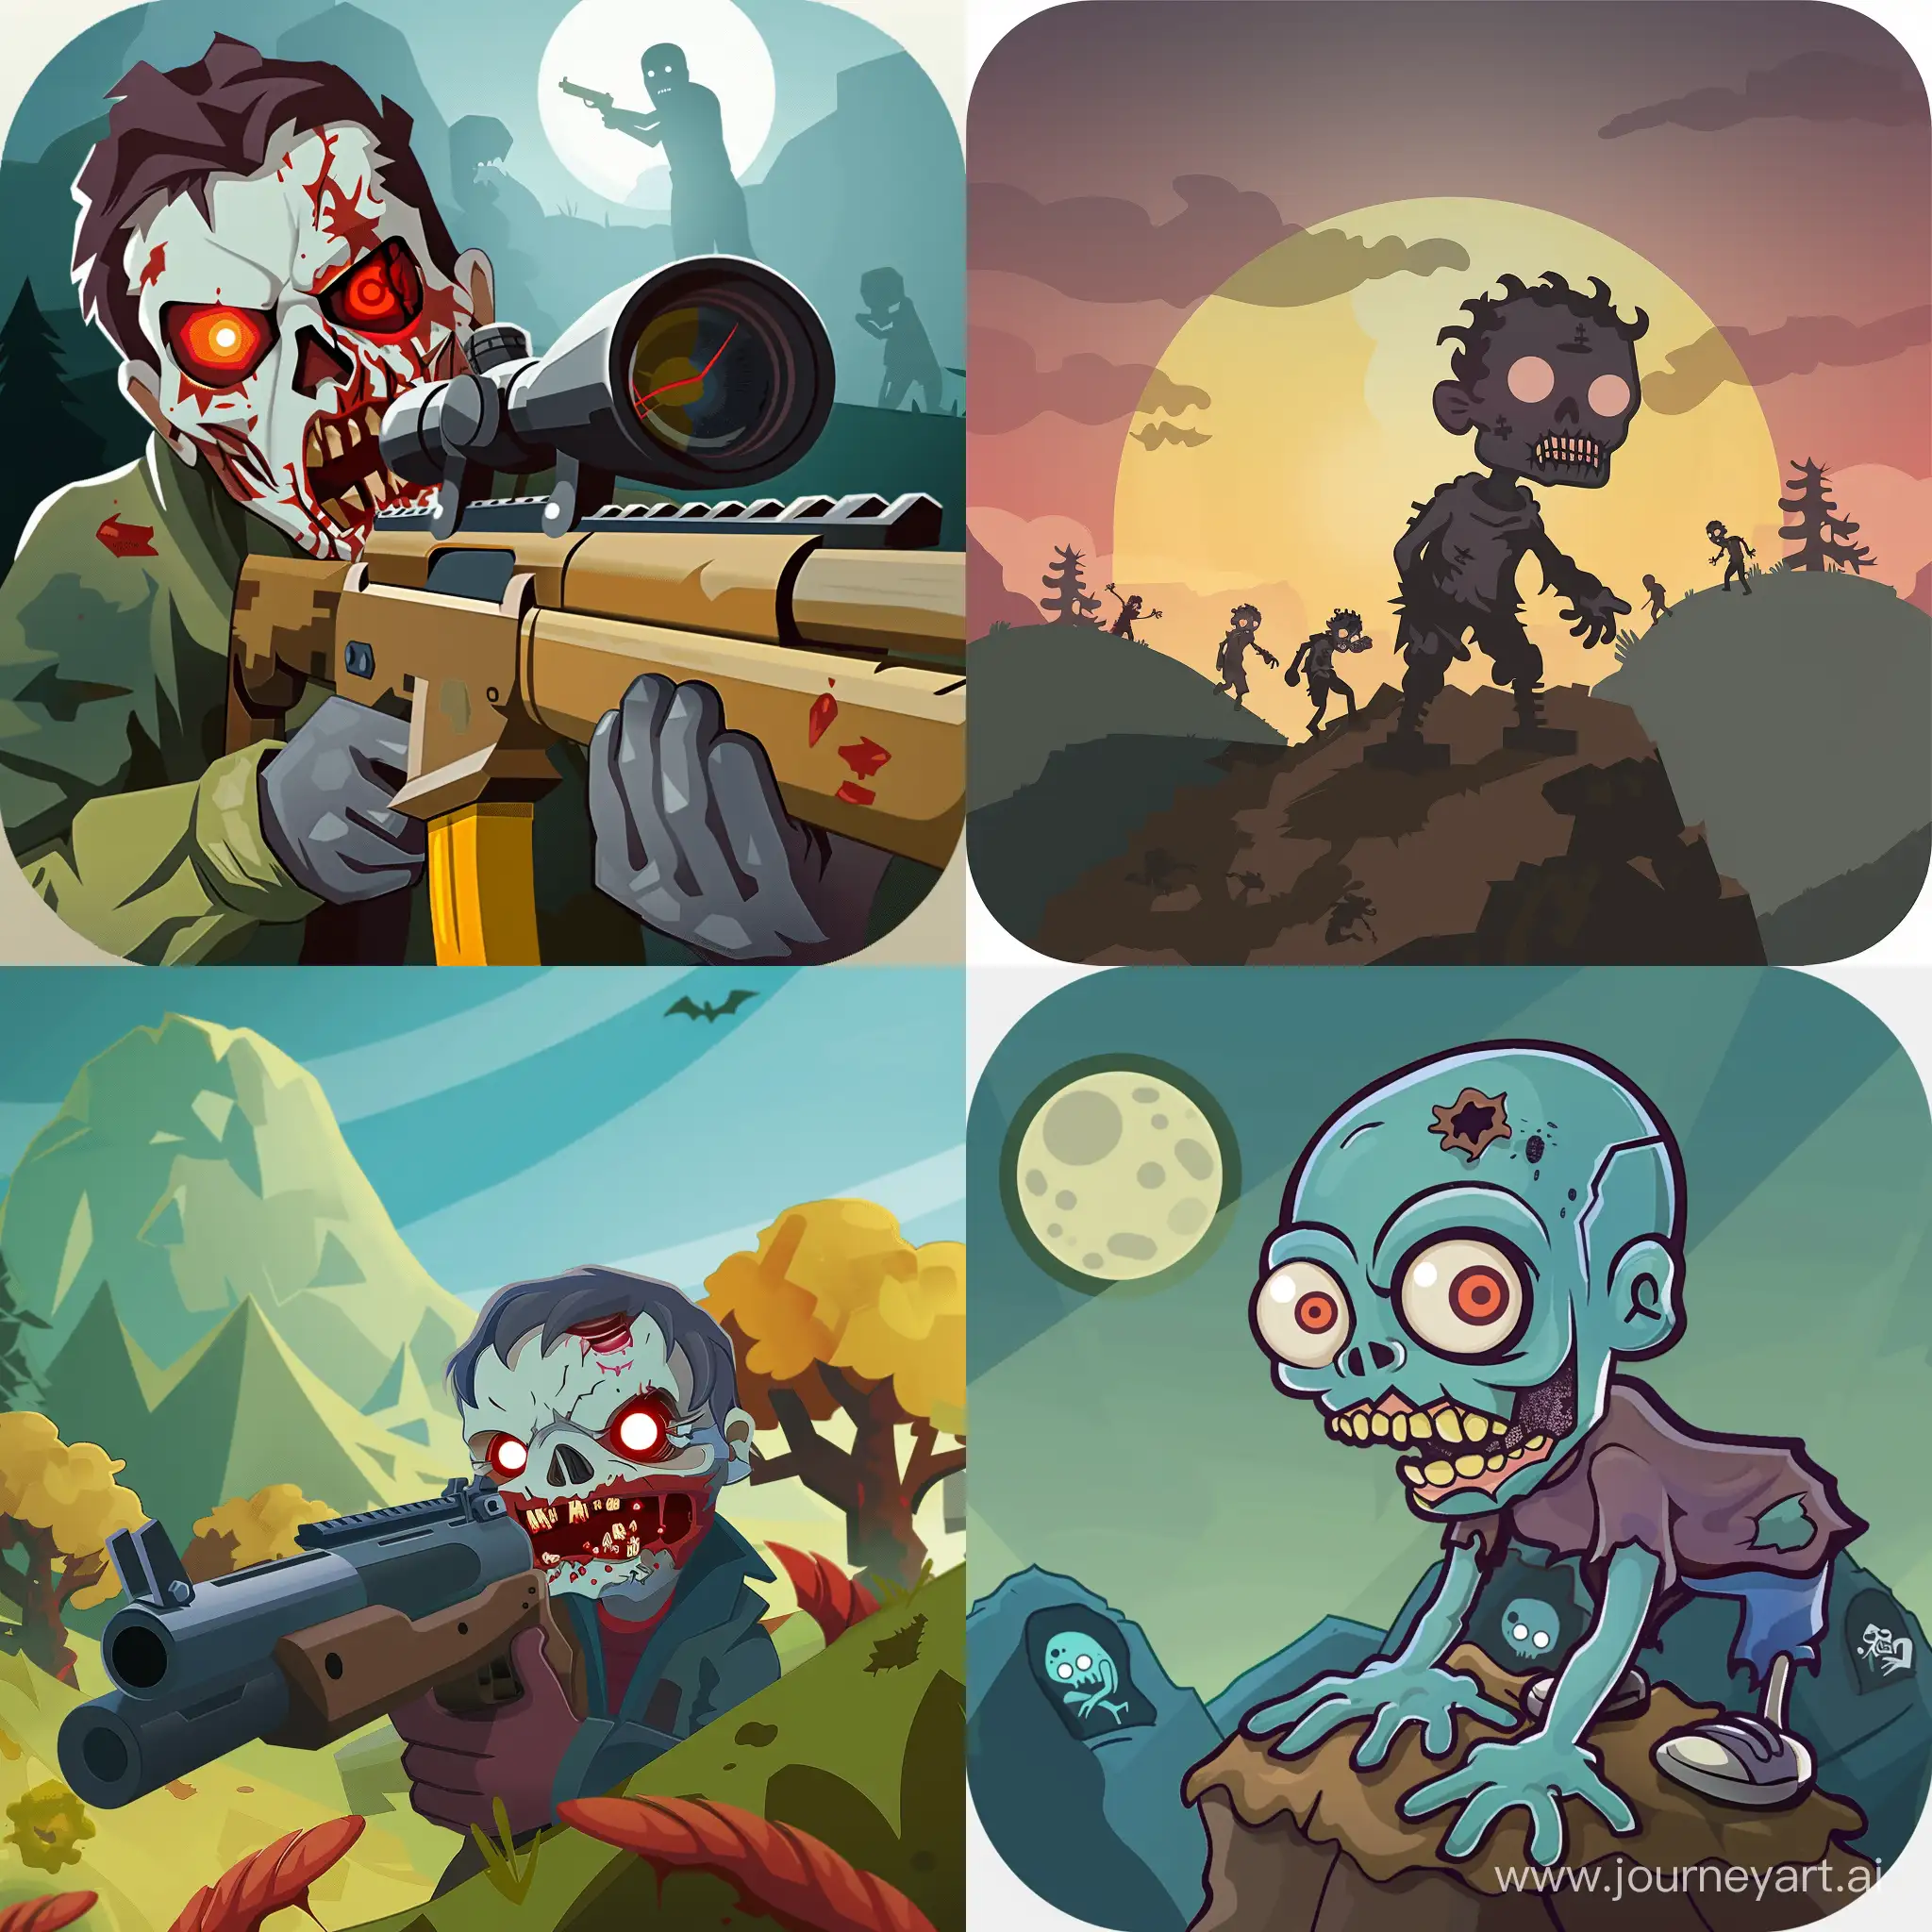 Shooter z game about hills and zombies